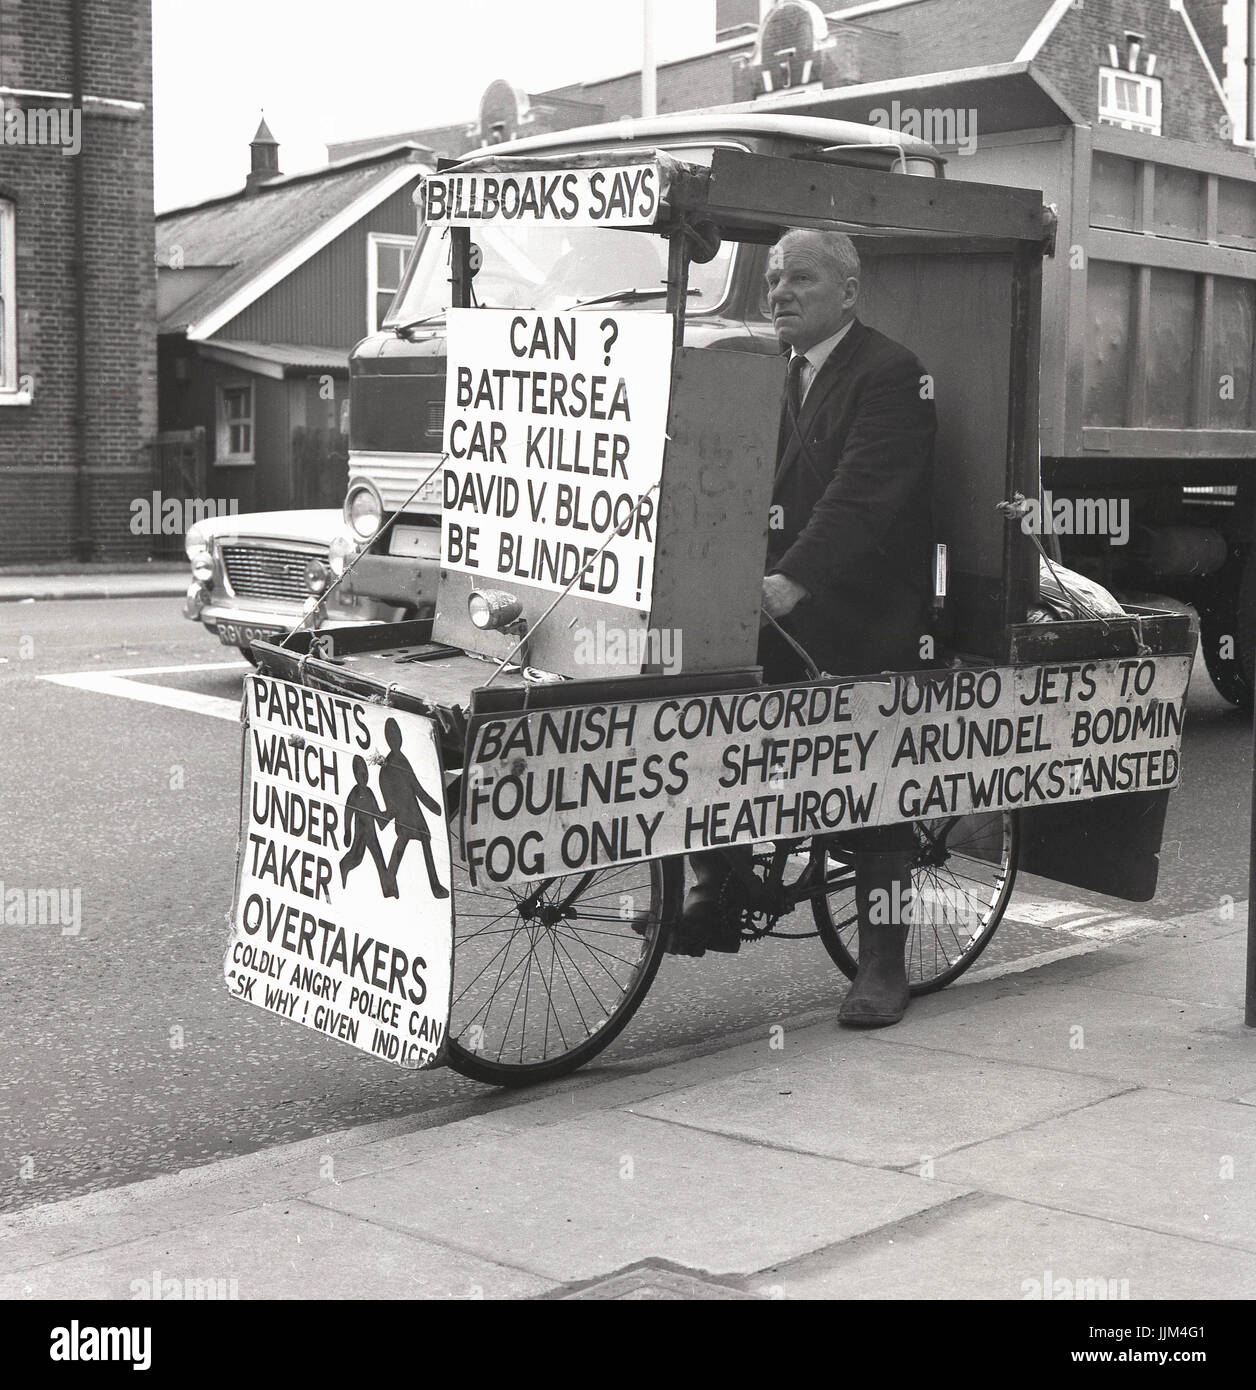 1971, Greenwich High Road, London, picture shows the eccentric Englishman and fervent poltical candidate Lt. Com William (Bill) Boaks on his 'campaign bus', a bicycle covered with placards and signs about road safety, a cause central to his beliefs.. Stock Photo